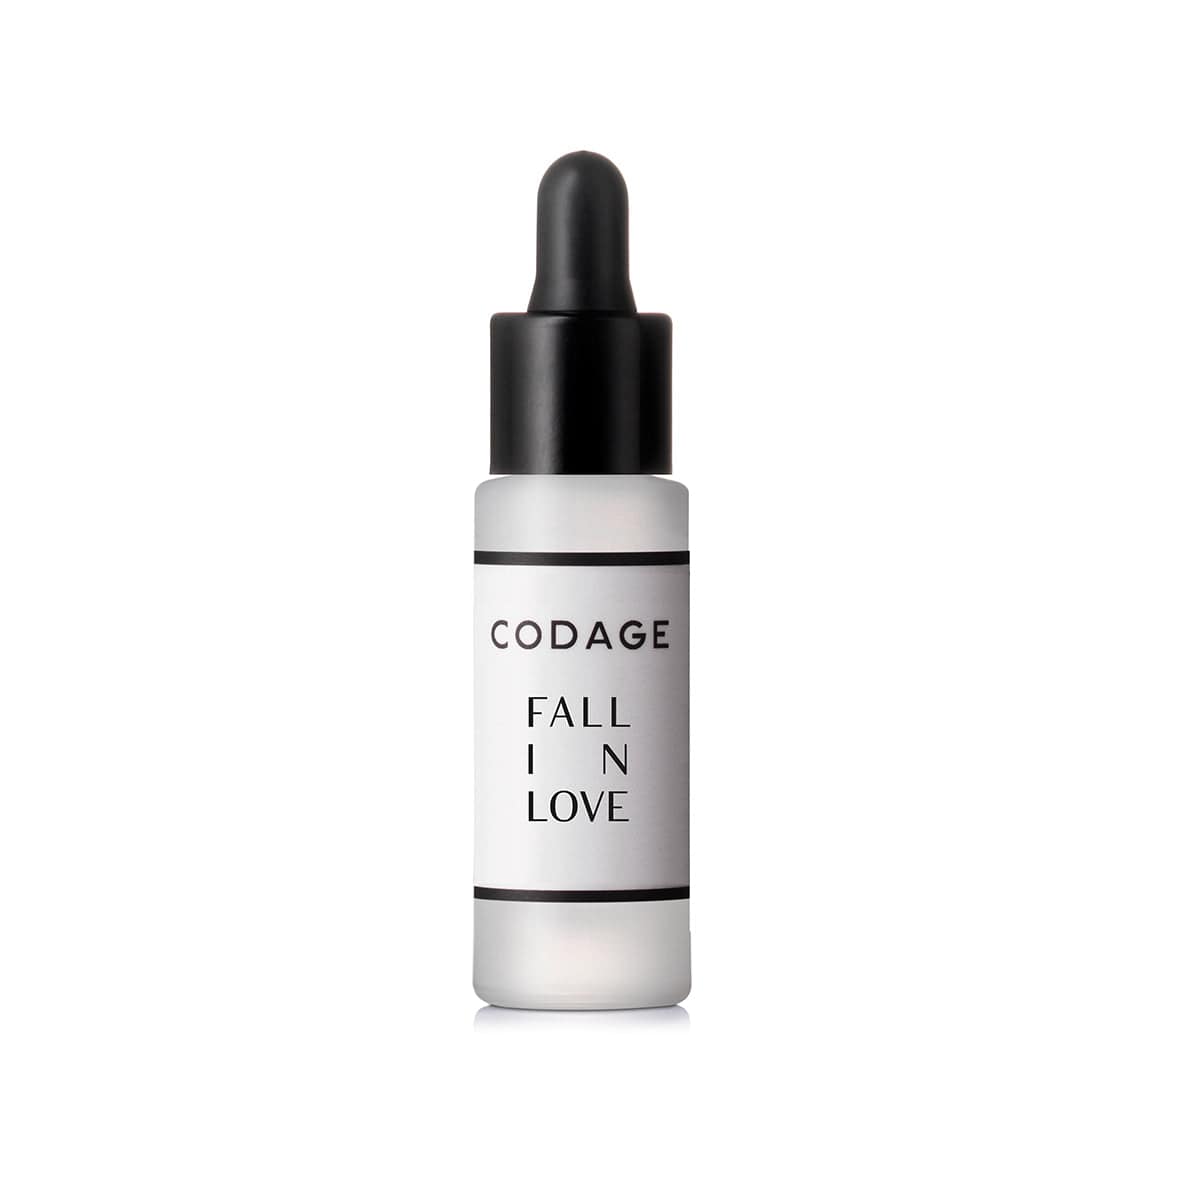 CODAGE Paris Product Collection Face Serum Fall in Love